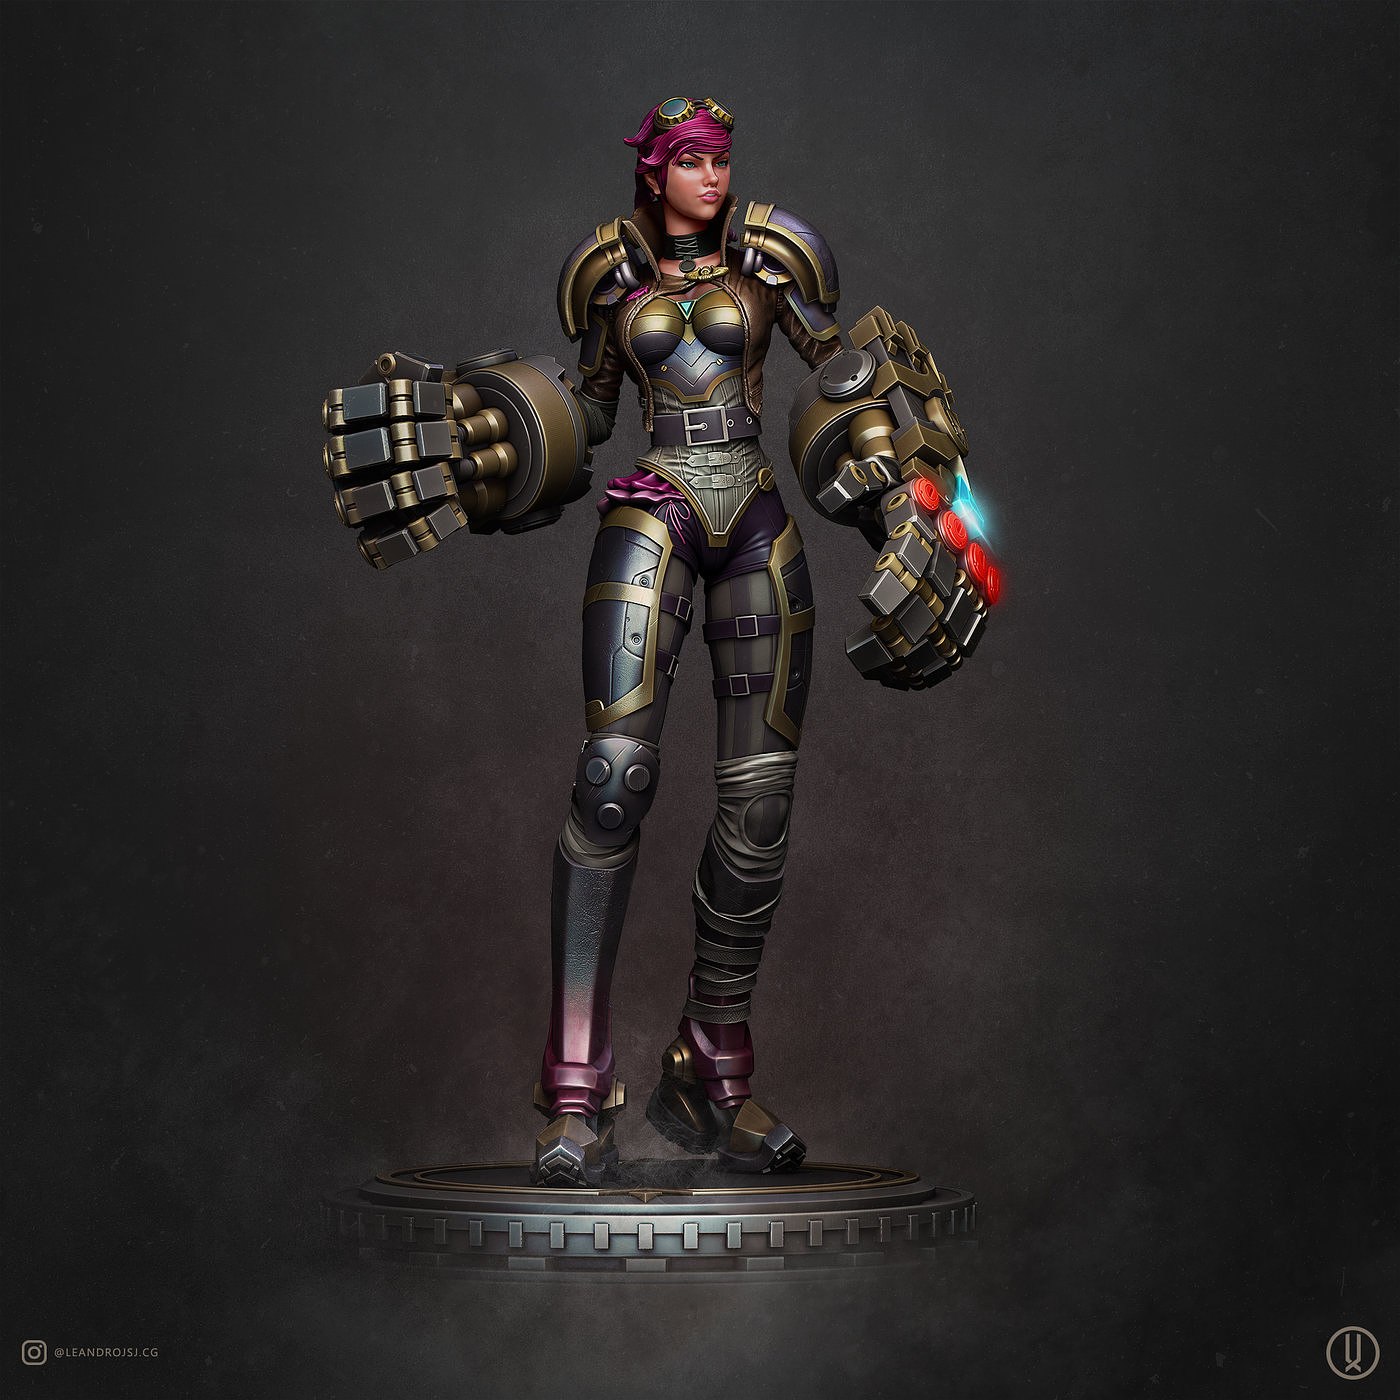 VI From League of Legends